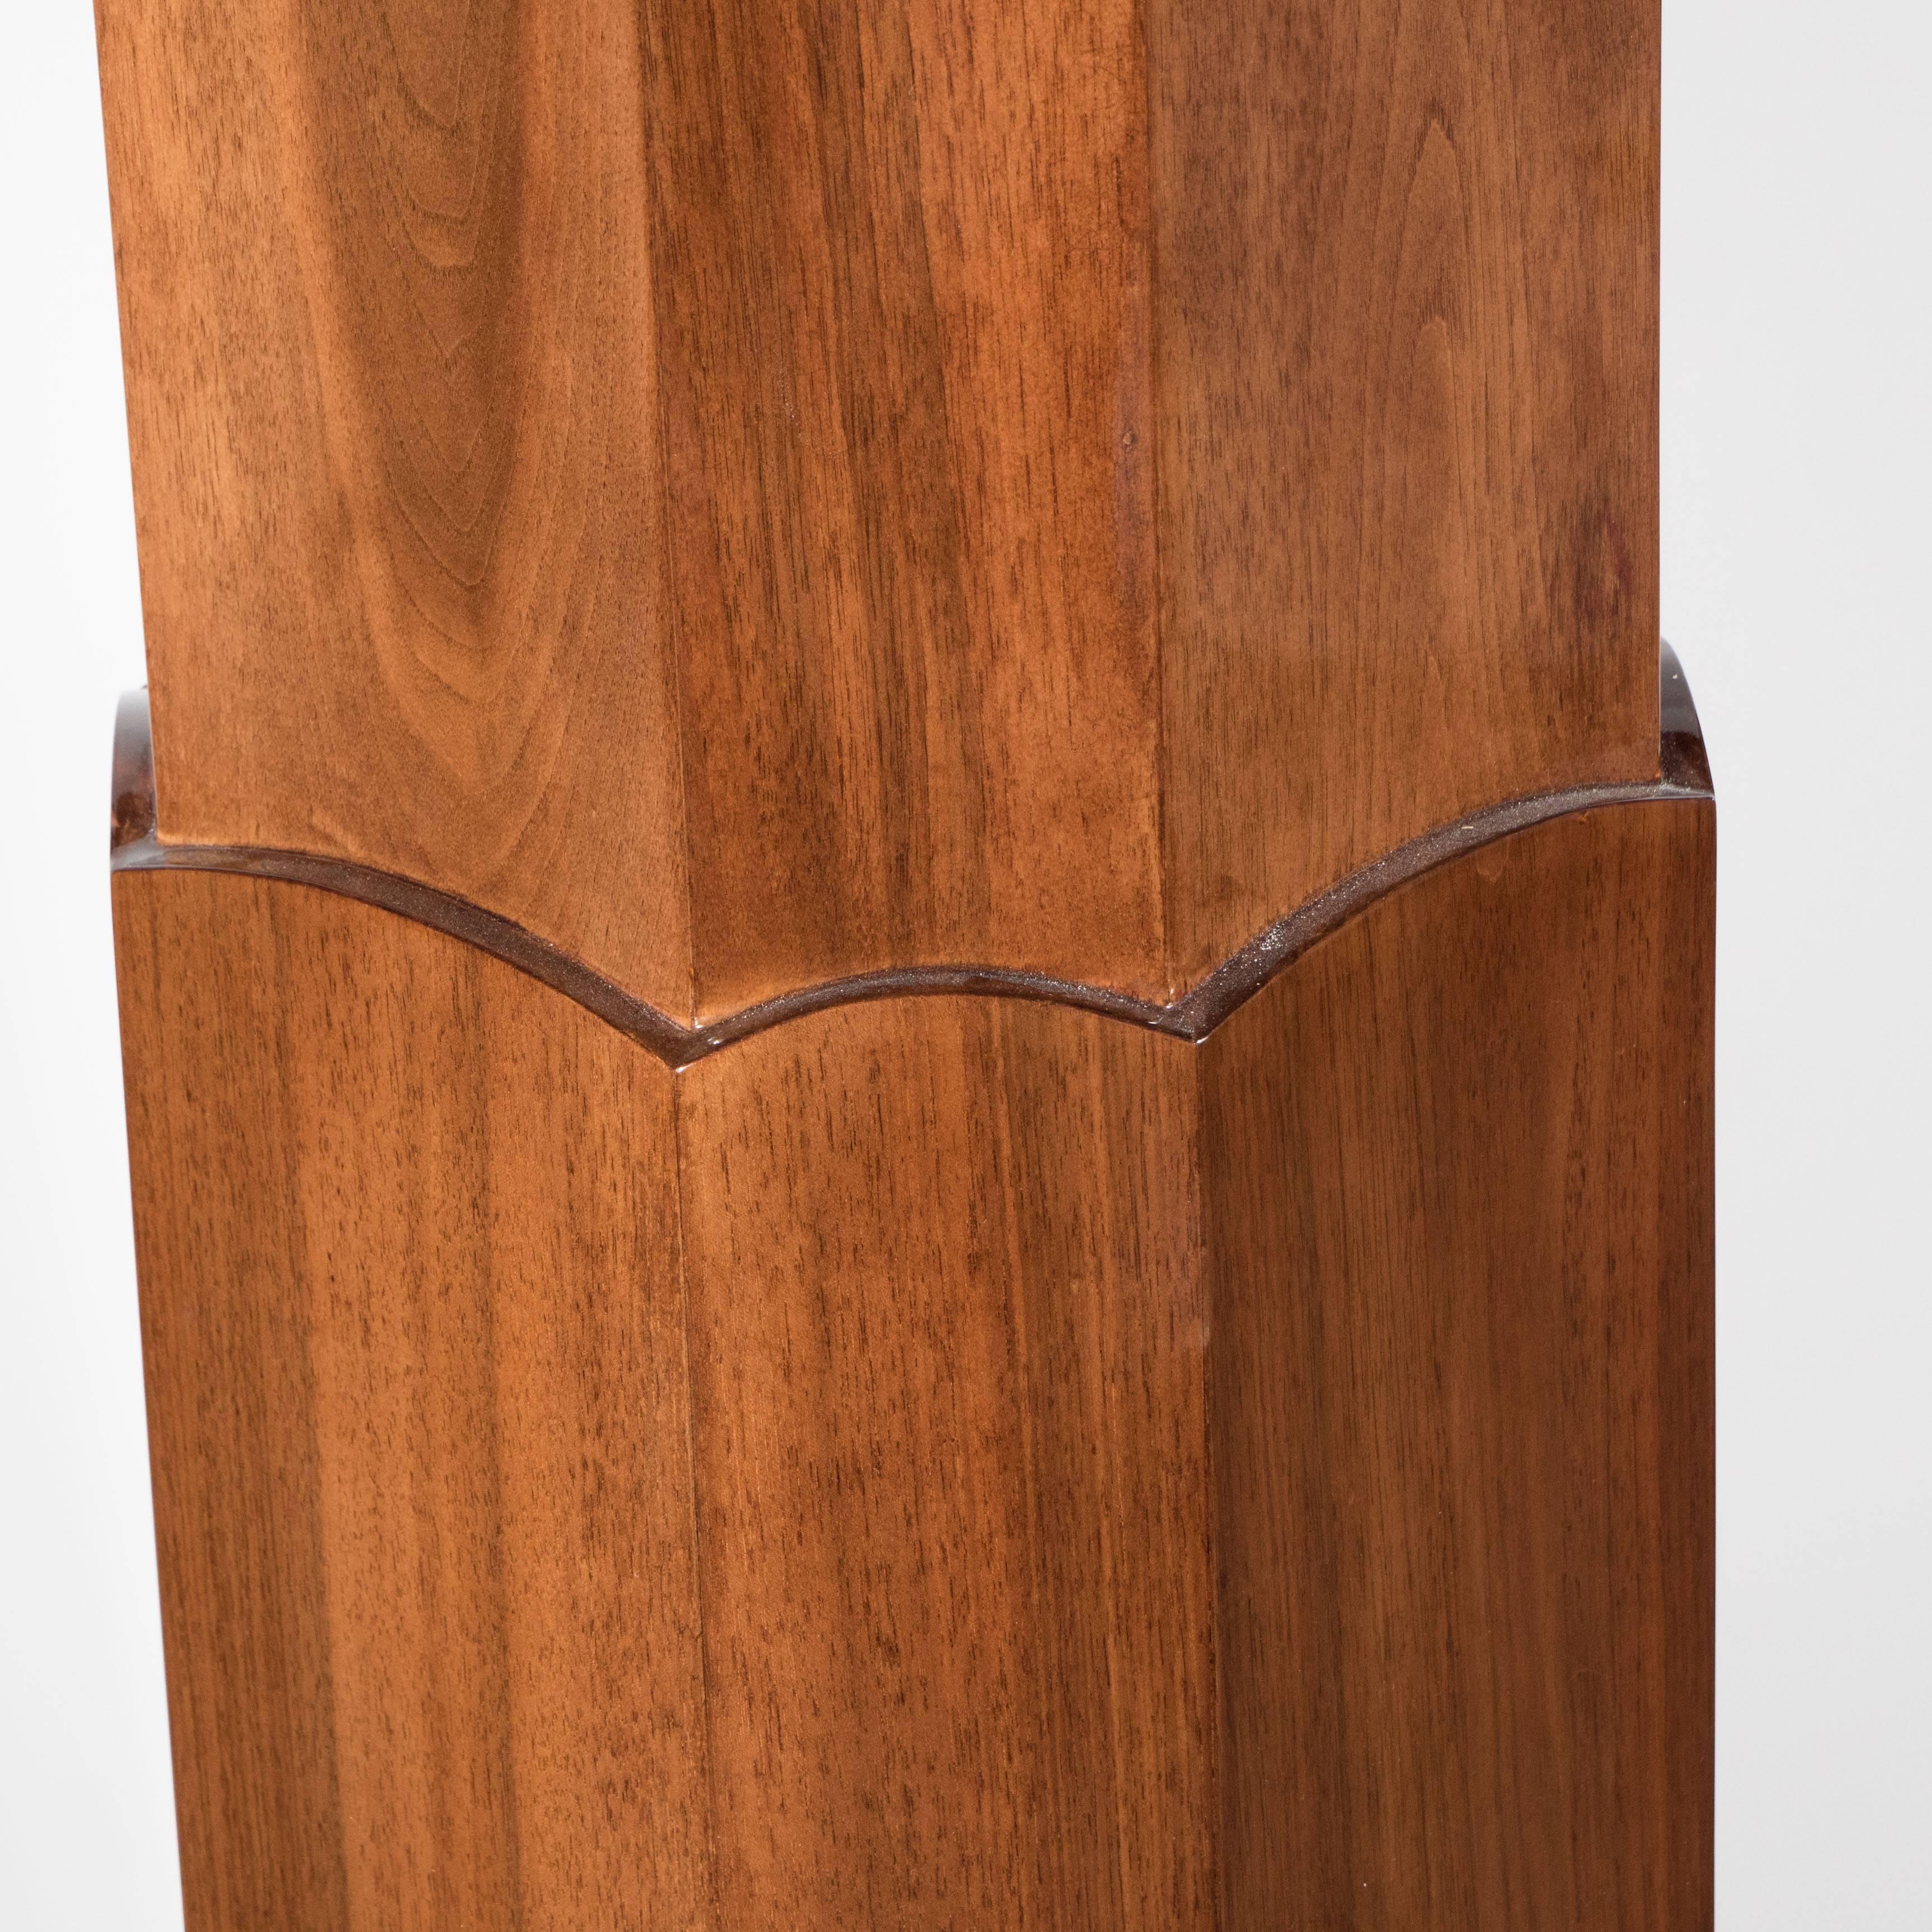 Art Deco Skyscraper-Style Pedestal in Bookmatched Walnut with Lacquer Accents 2